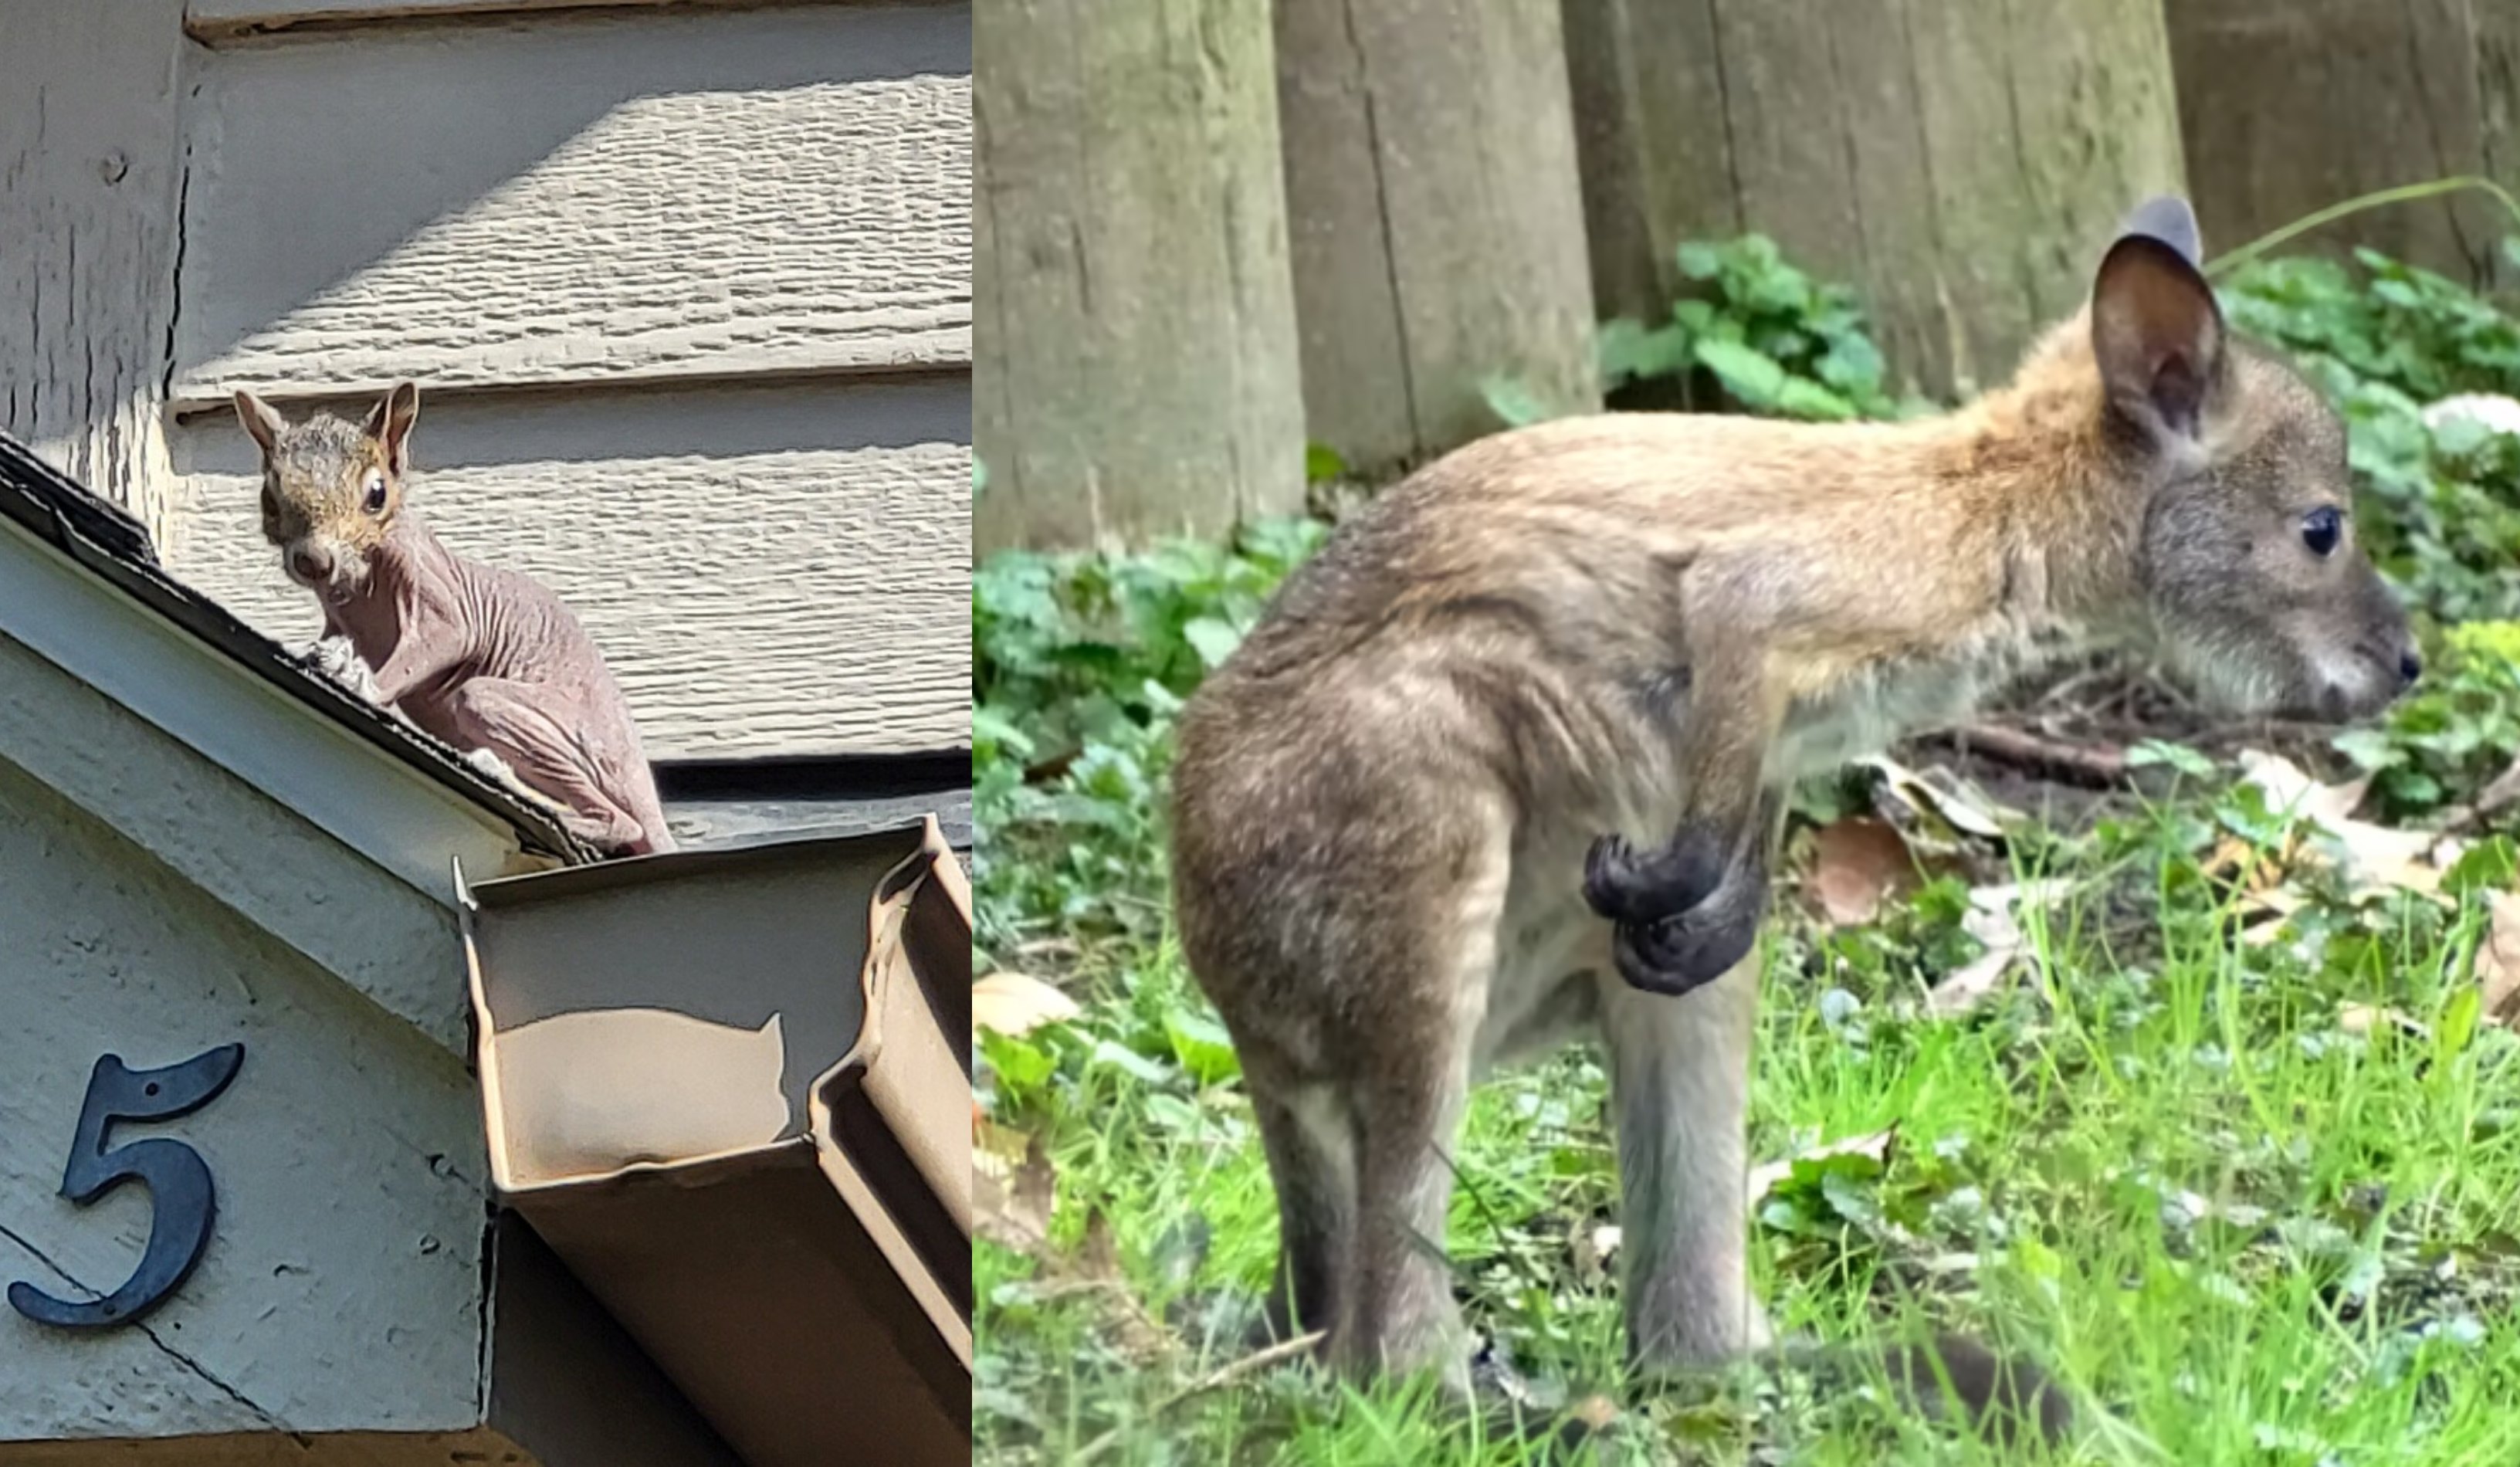 1 year ago Looking back on the mystery of Metro Detroits missing wallaby